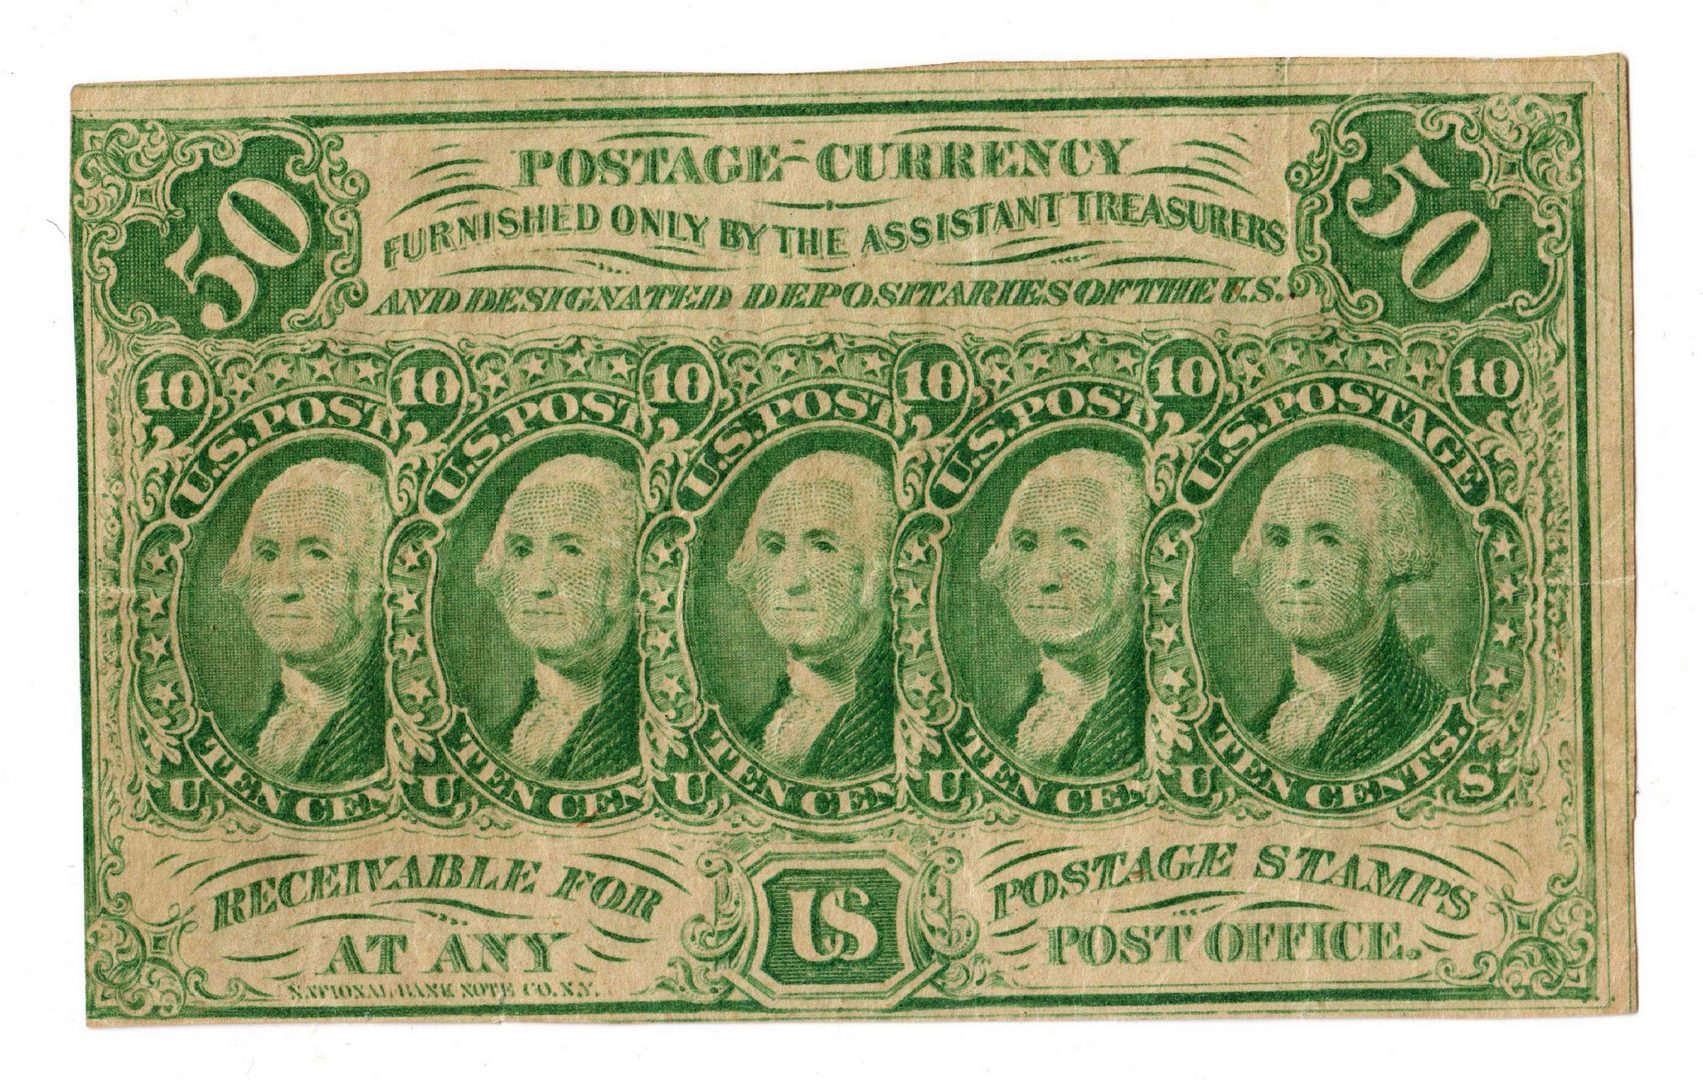 Lot 4: Group Of Seven 50 Cent U.S. Fractional Banknotes